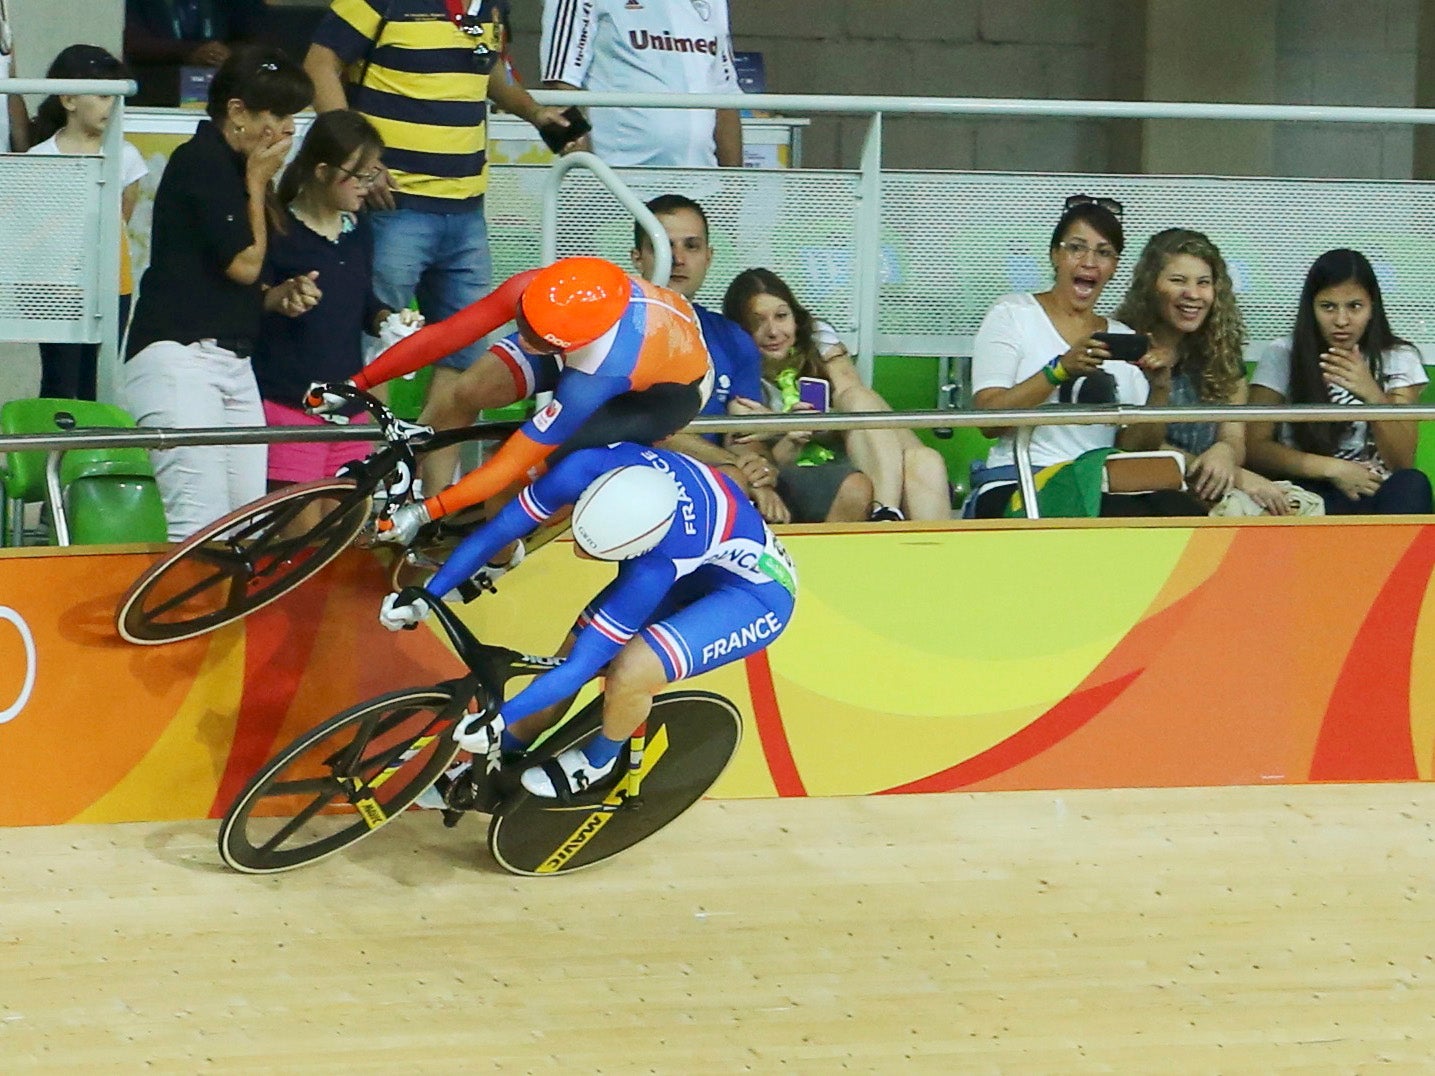 Rio 2016: Dutch cyclist Laurine van Riessen prevents nasty collision by riding up side of track during keirin